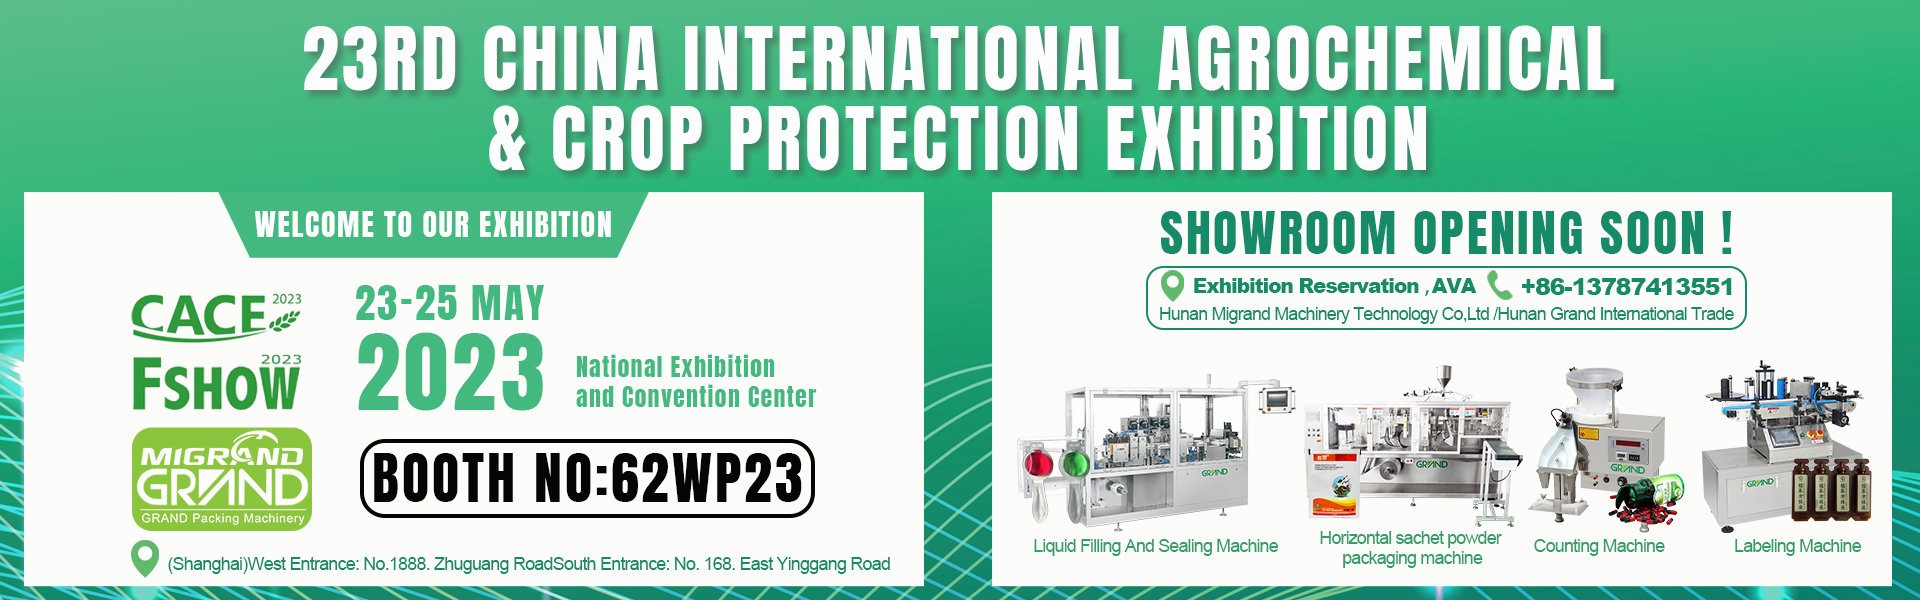 Grand-Packing Agrochemical Packing Machinery Exhibition